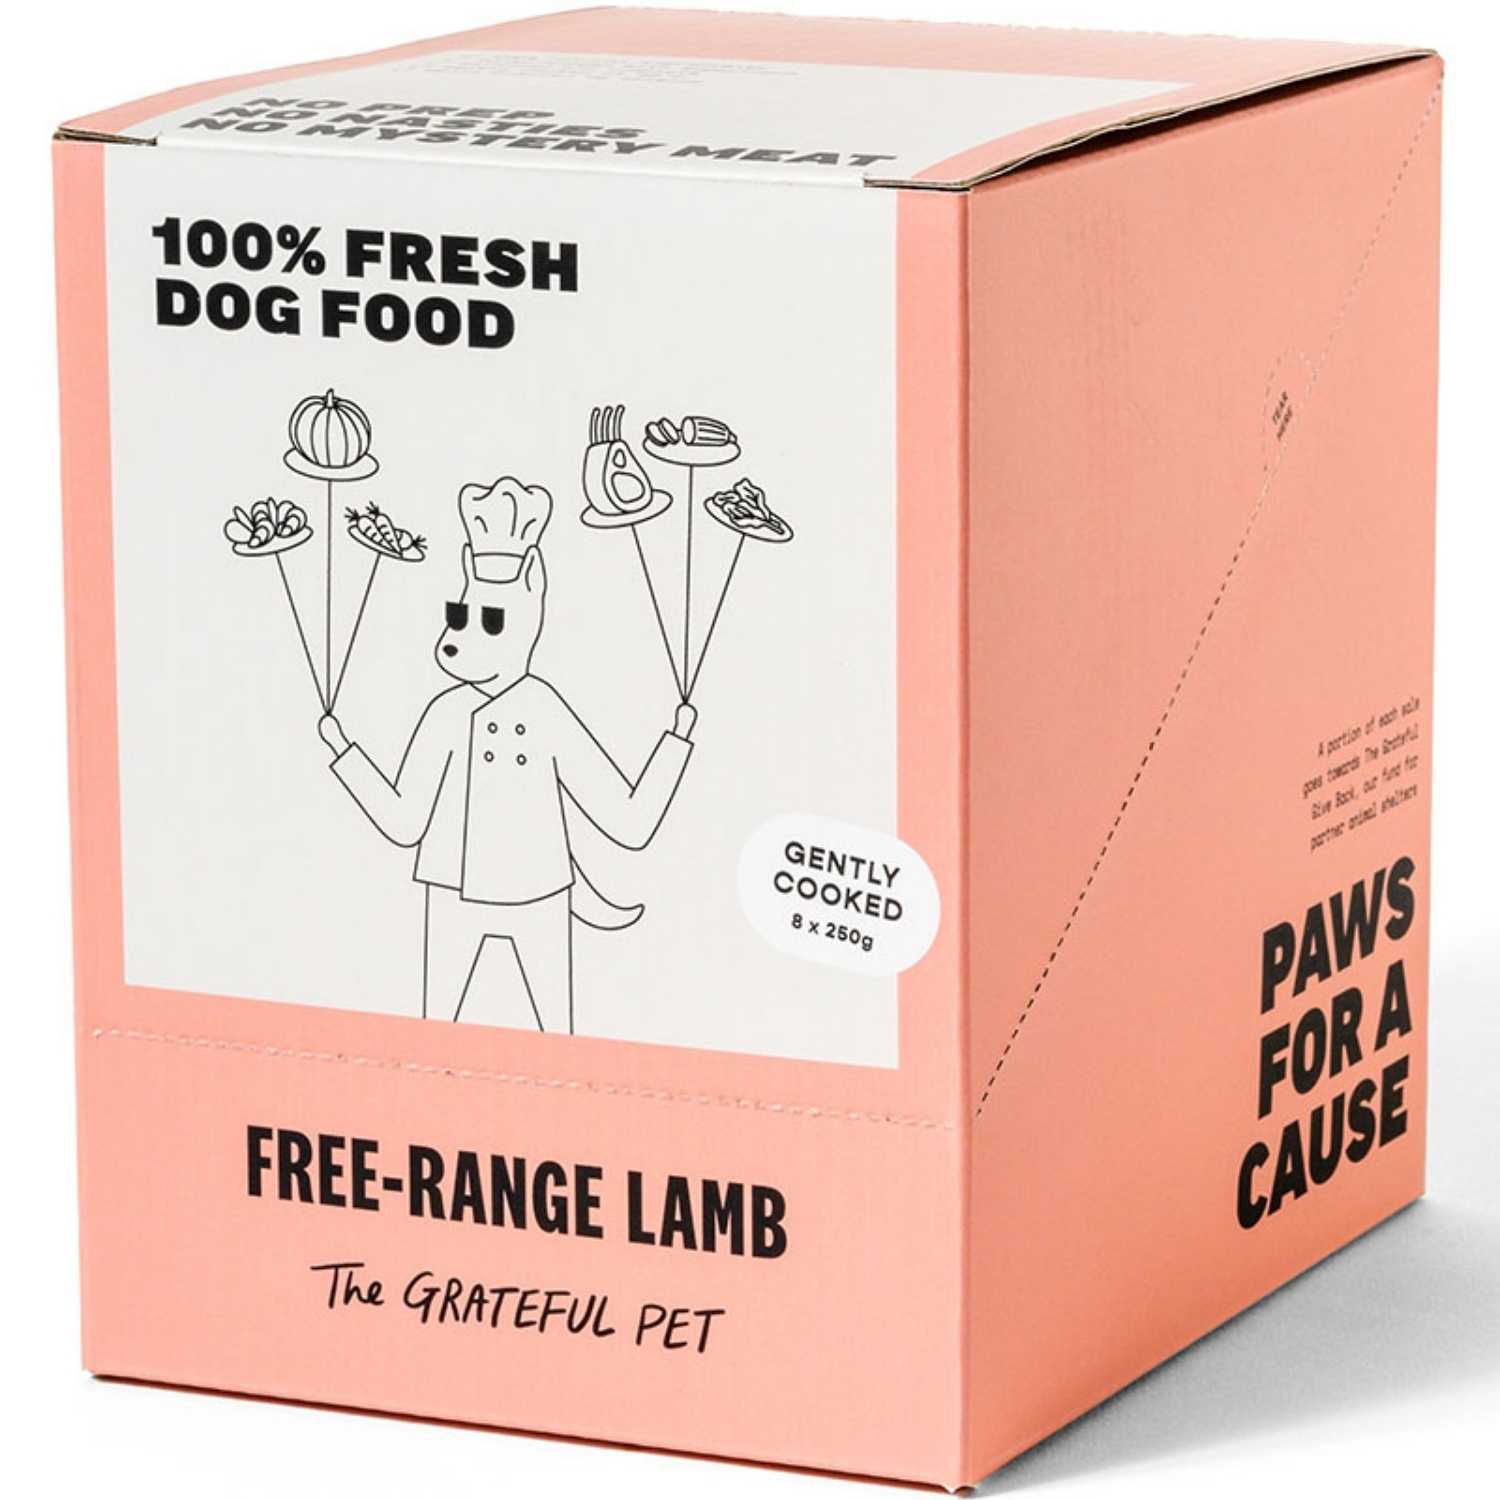 The Grateful Pet - Gently Cooked (Range-Free Lamb) - Dog (8 x 250g Pouch) Food (Case)